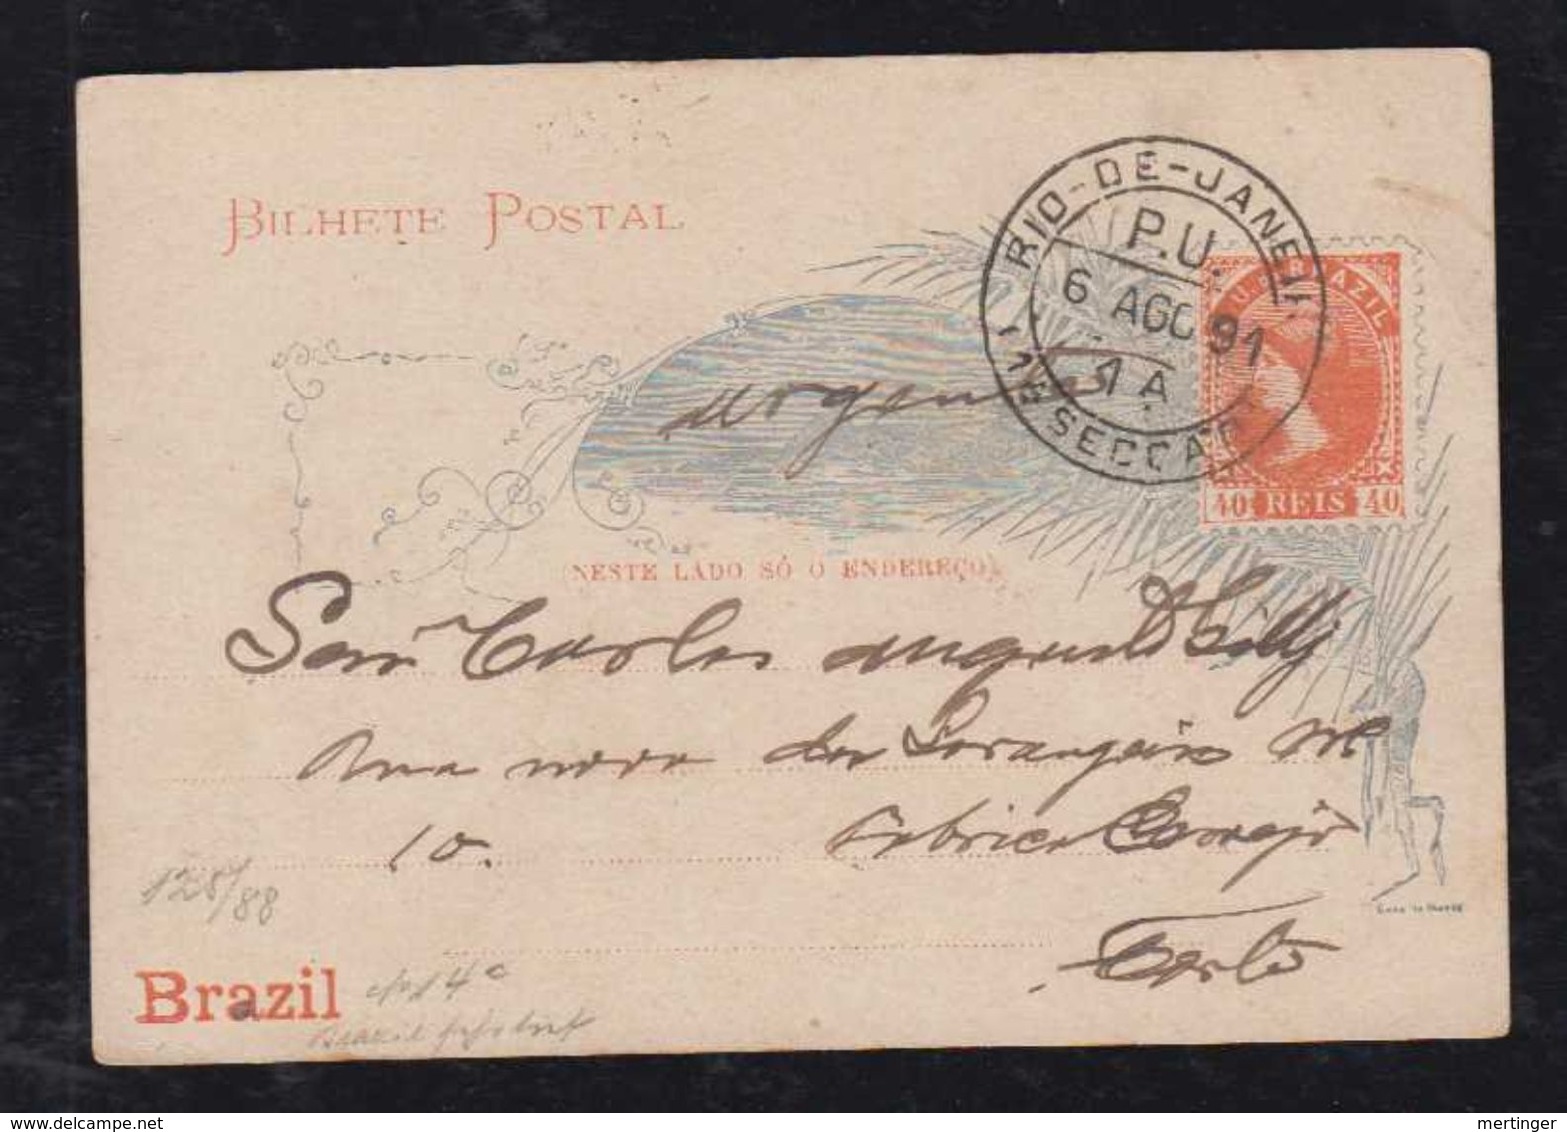 Brazil Brasil 1891 BP 21 40R Stationery Card Local Use RIO Format 125/88mm - Entiers Postaux